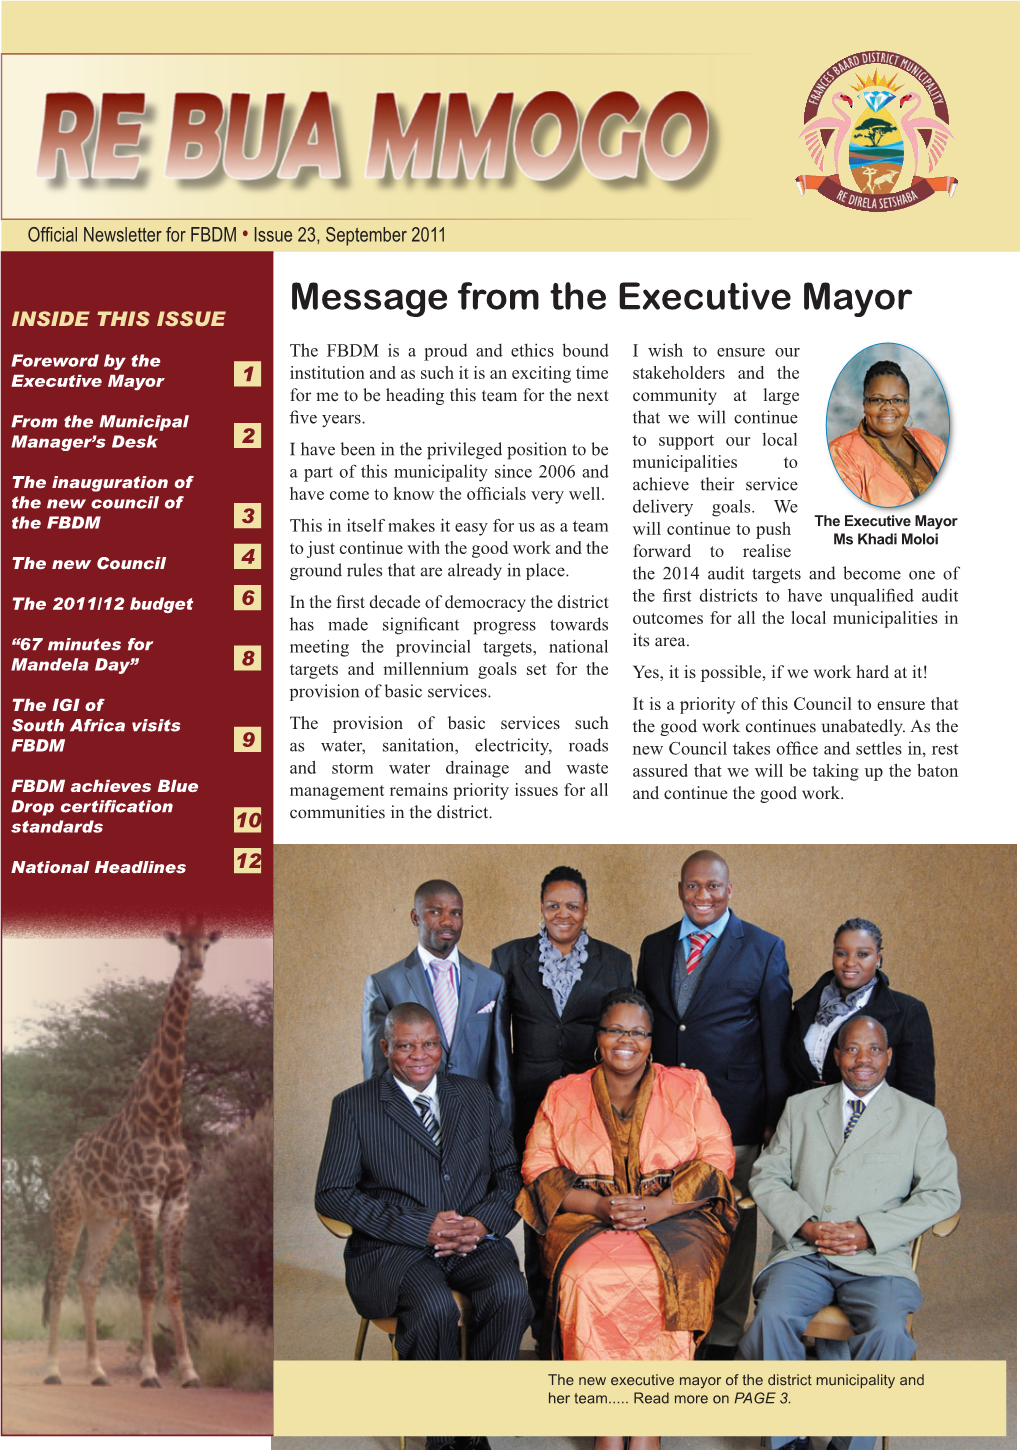 Message from the Executive Mayor INSIDE THIS ISSUE